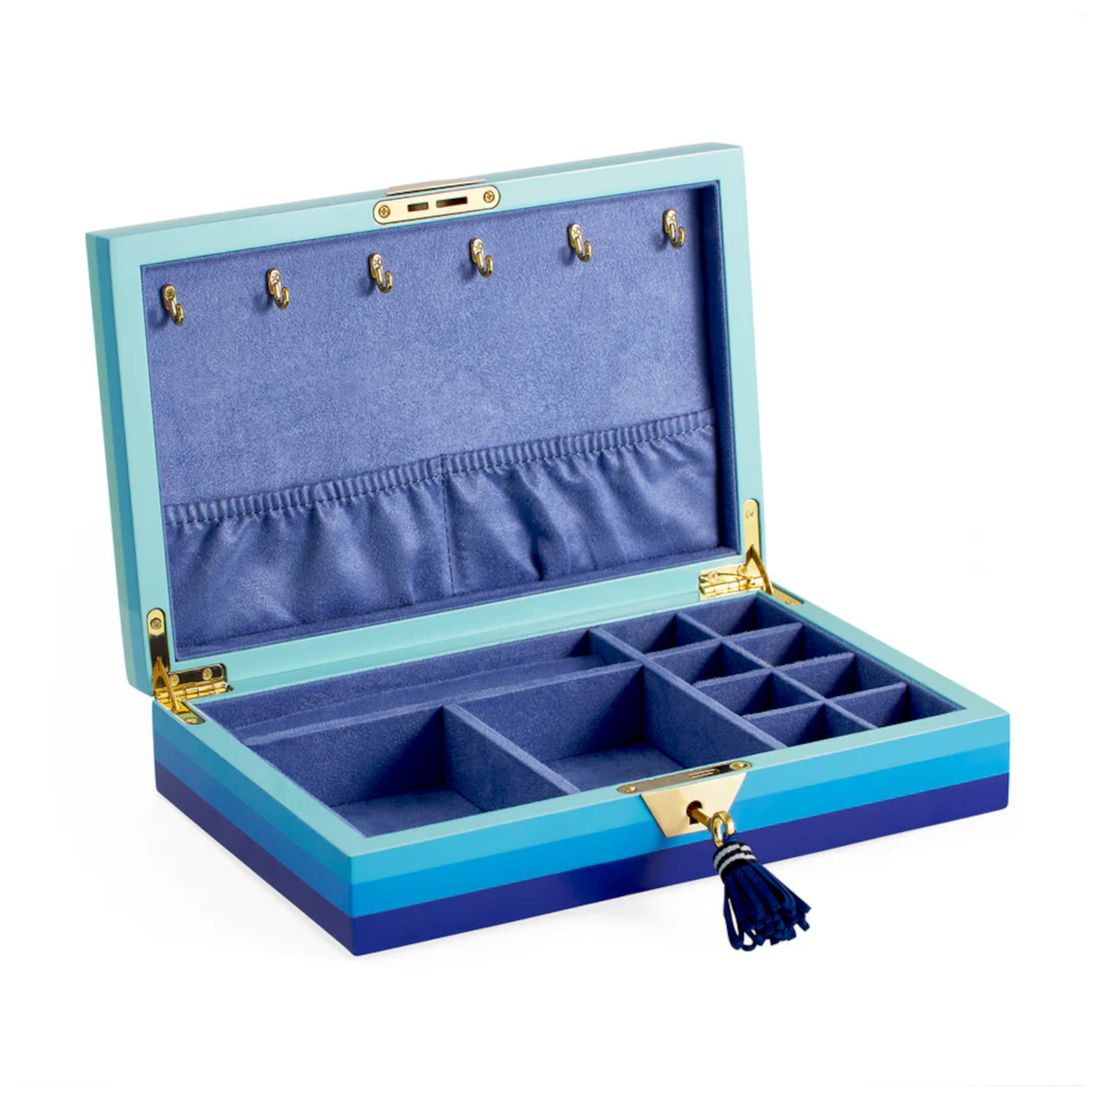 SCALA LACQUER jewellery box, shades of blue